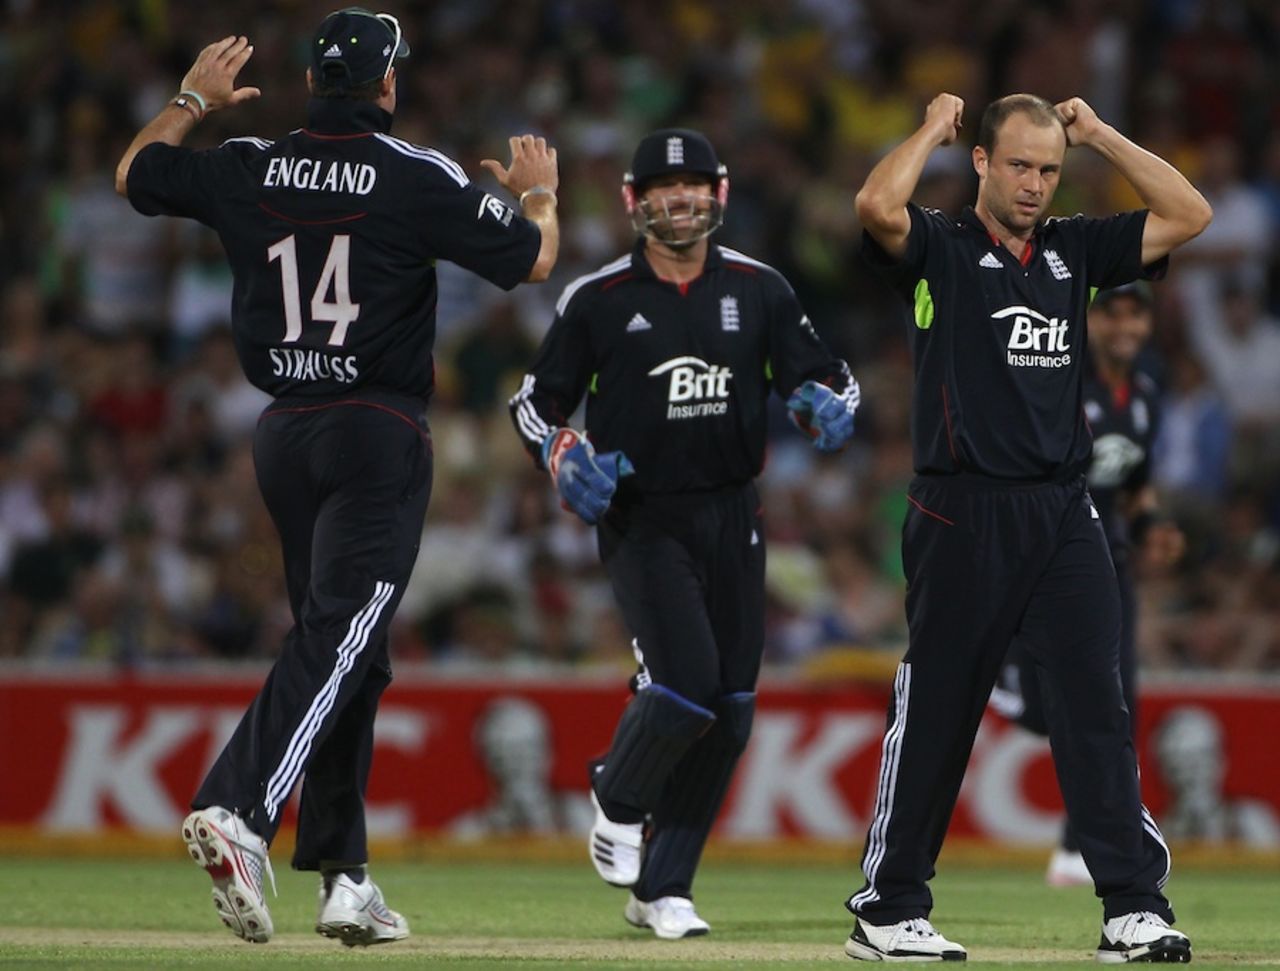 Jonathan Trott picked up his first two ODI wickets, Australia v England, 4th ODI, Adelaide, January 26, 2011